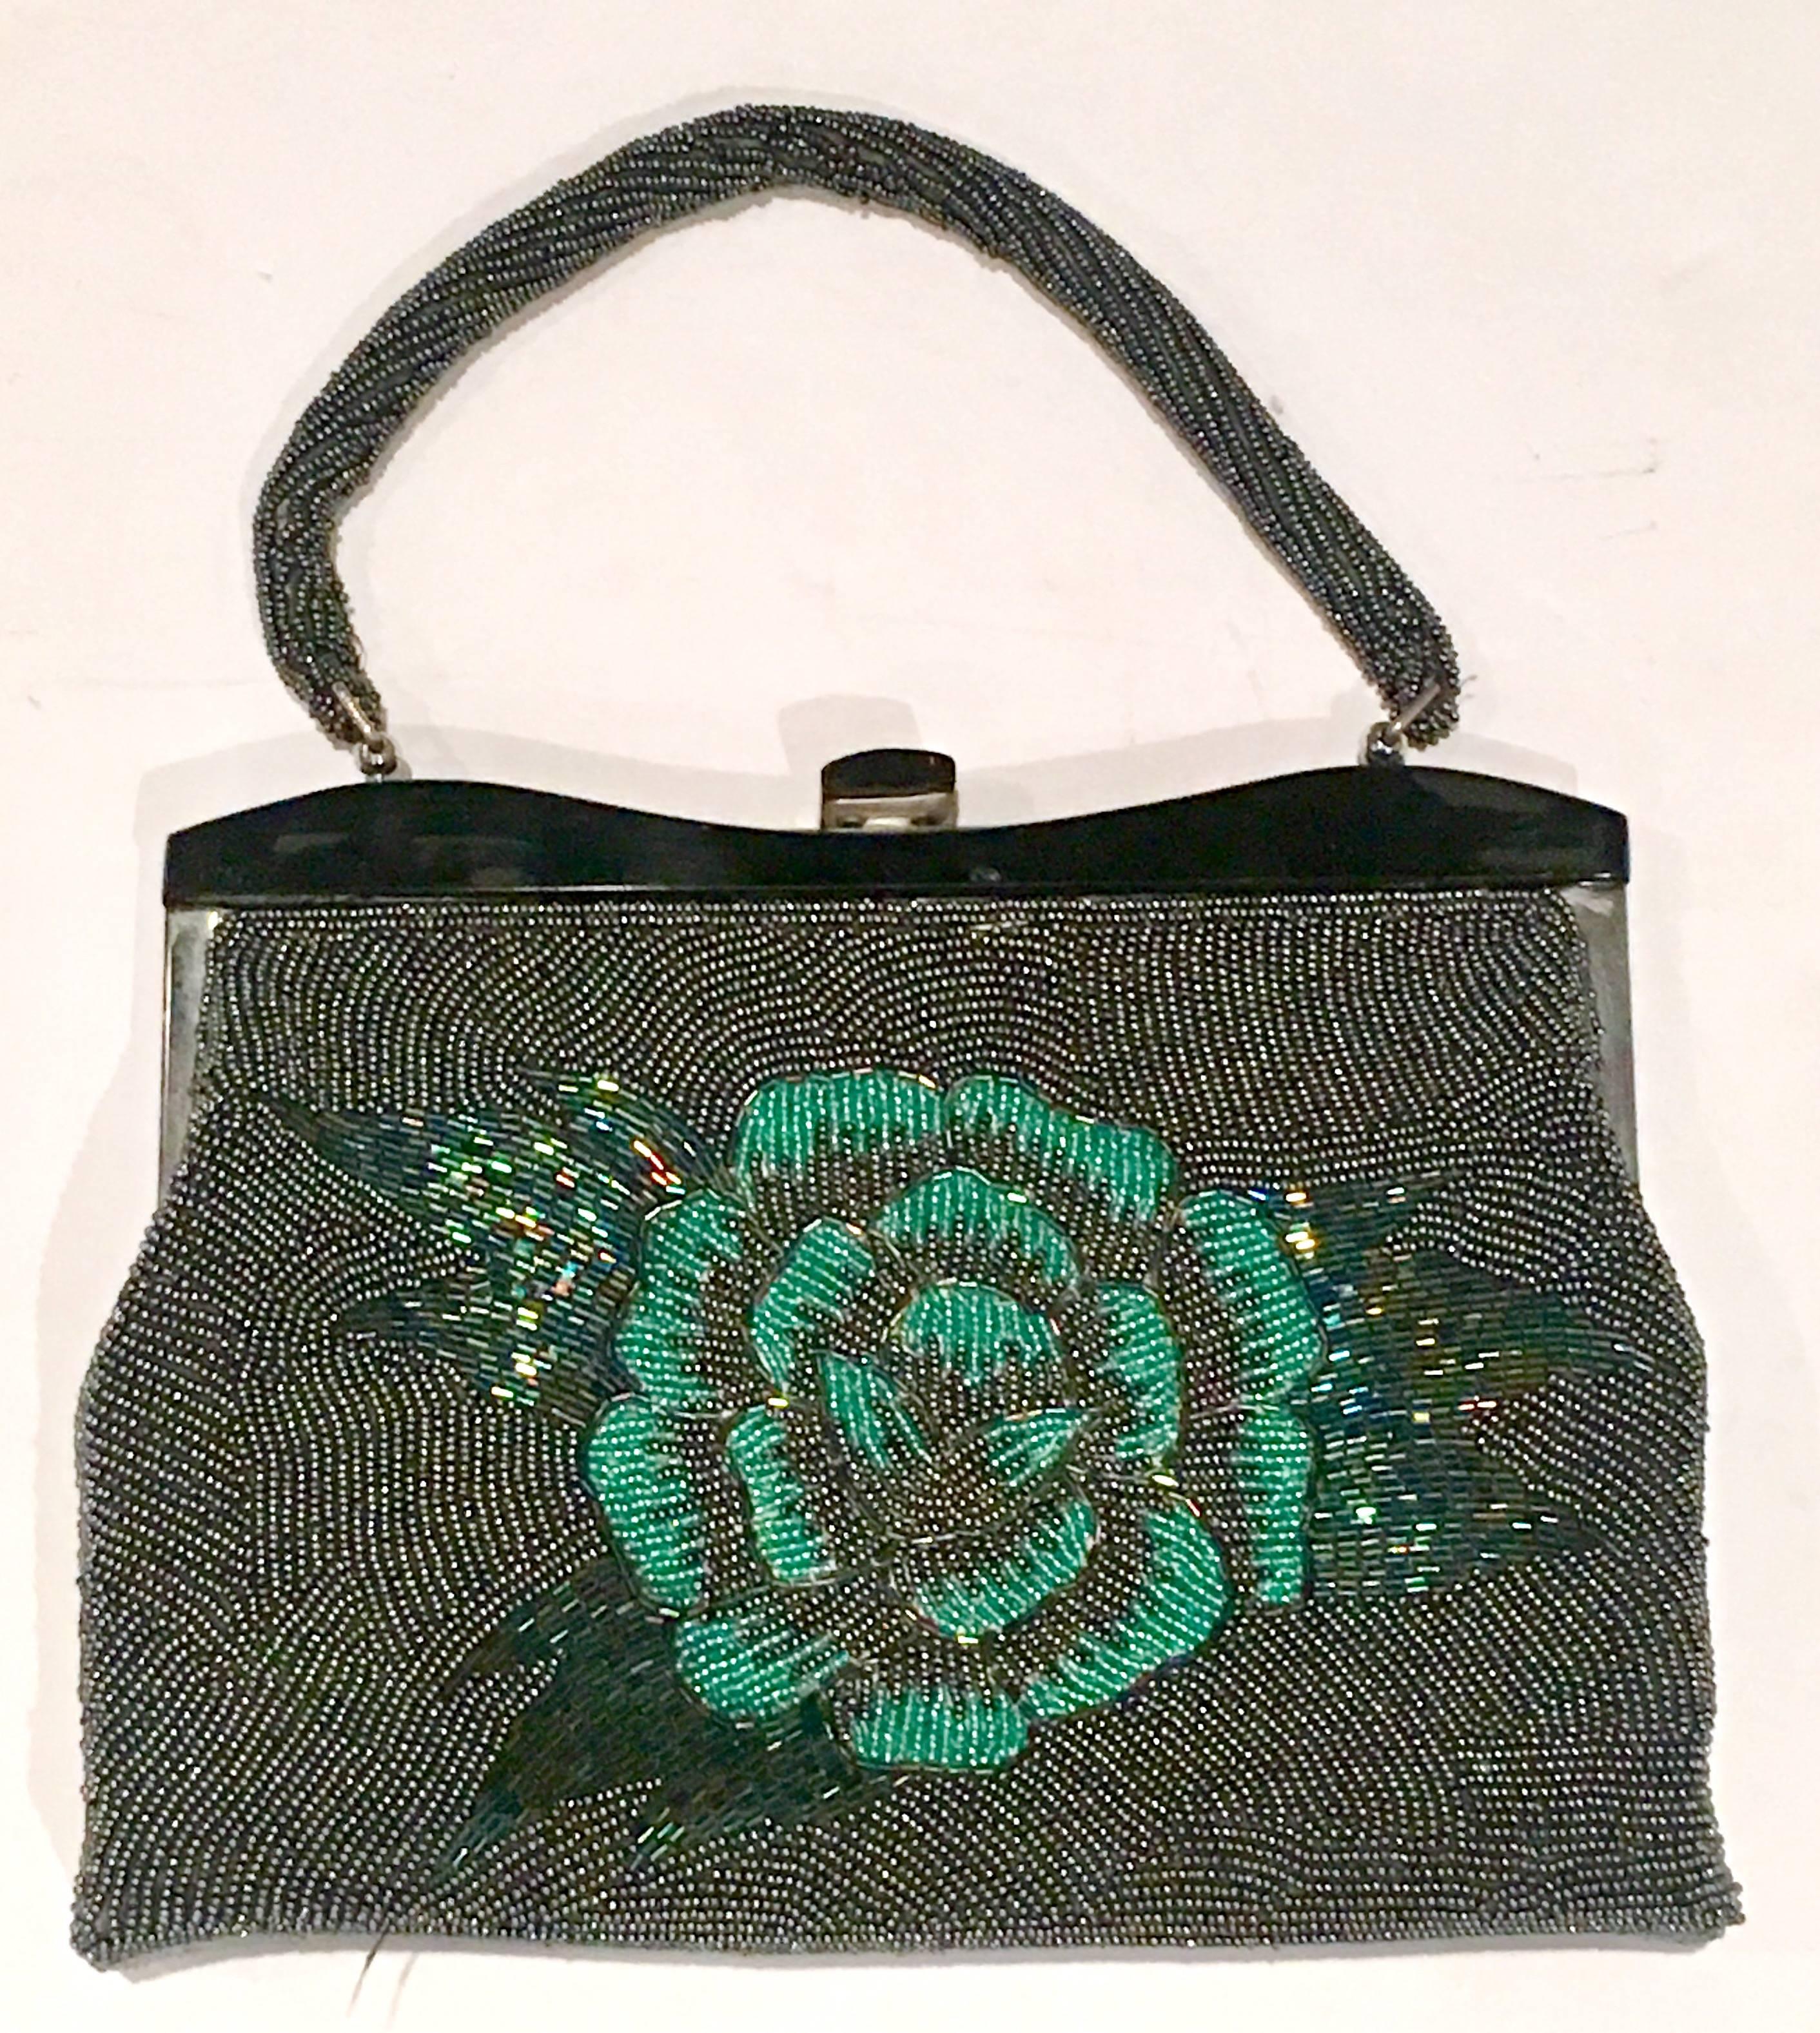 1950'S Glass Bead Handbag with chrome and black celluloid frame detail. This floral motif beaded gem features,  
a black ground with gunmetal, aqua, blue and green glass beads with a different pattern on each side. The shoulder strap is also beaded.